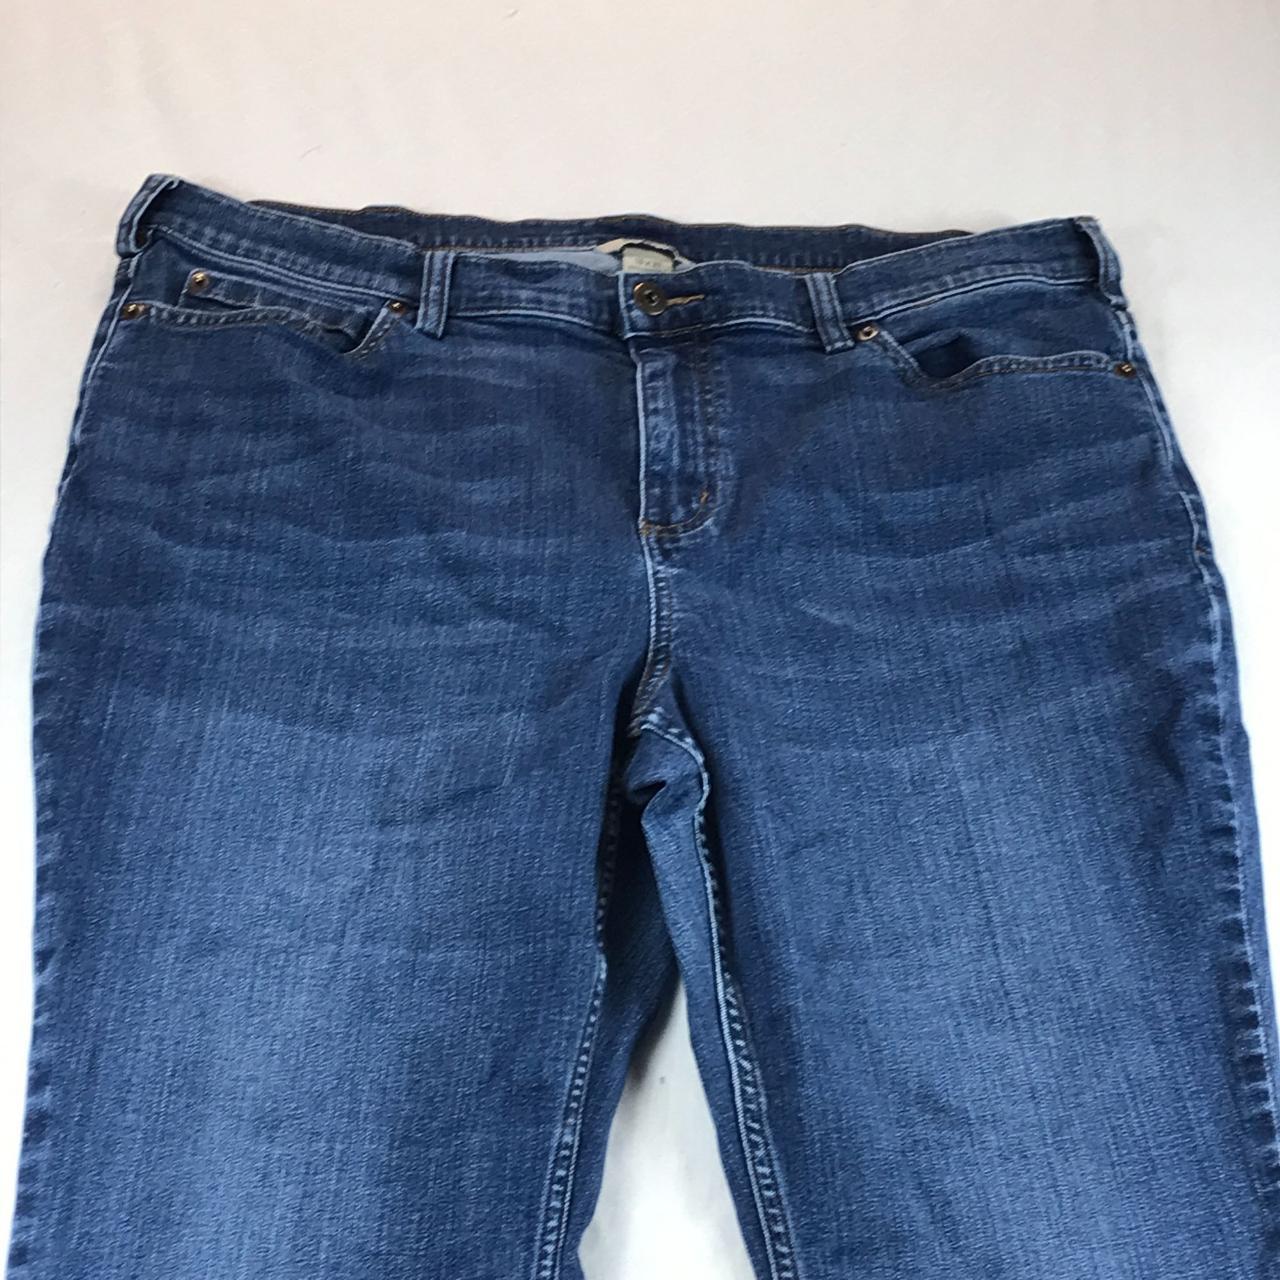 Duluth Trading Co Womens Bootcut Jeans Size 18... - Depop